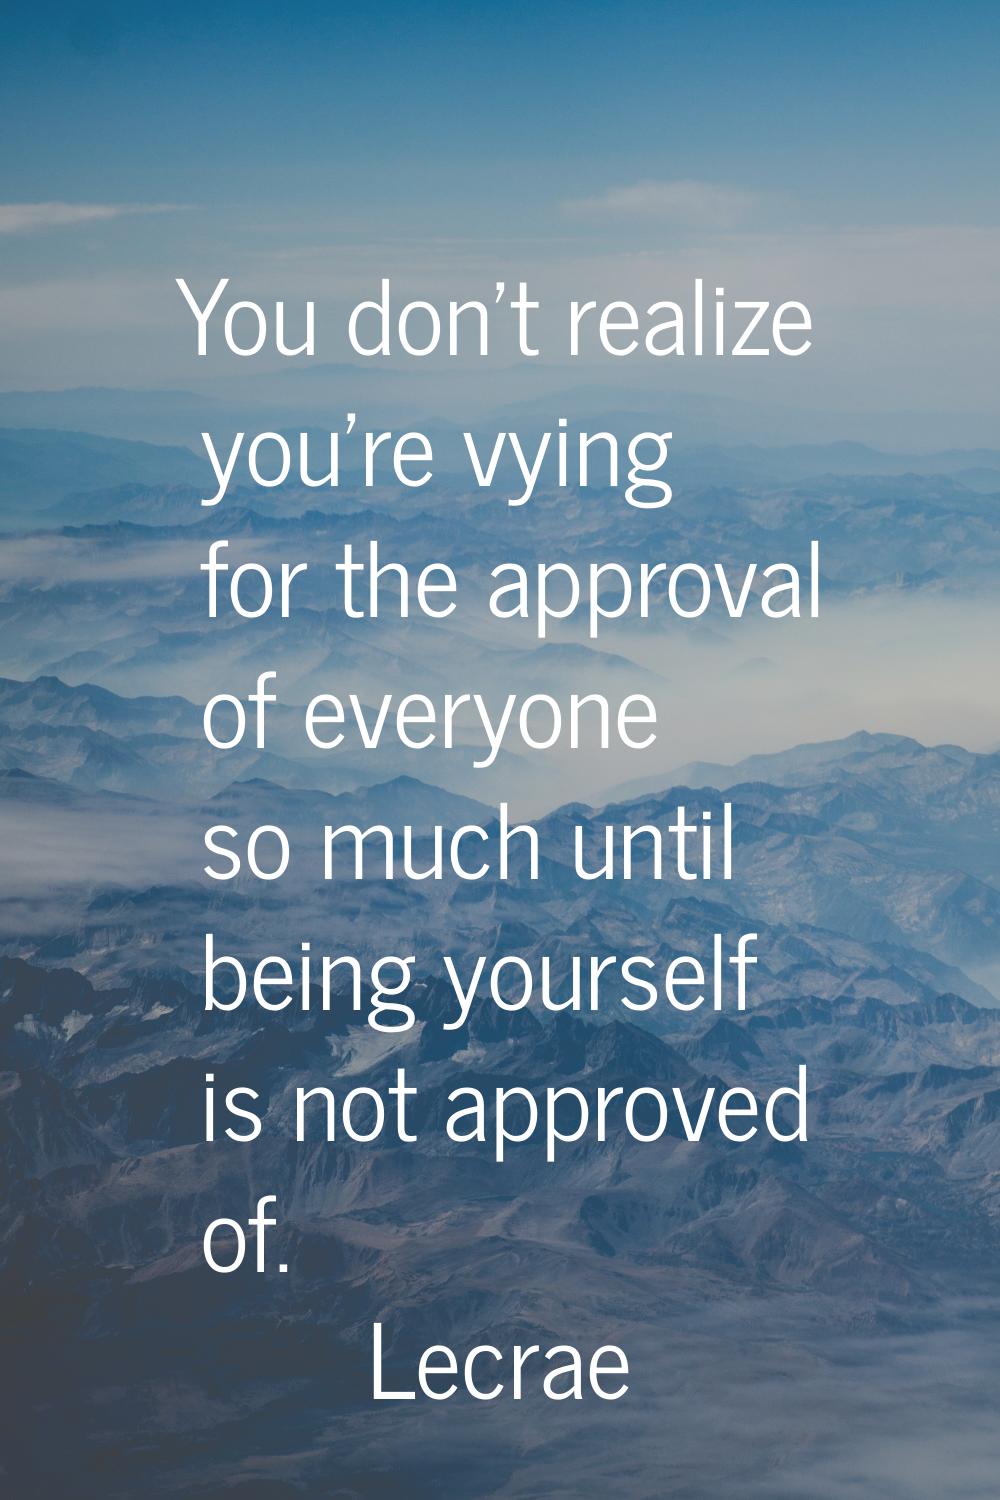 You don't realize you're vying for the approval of everyone so much until being yourself is not app